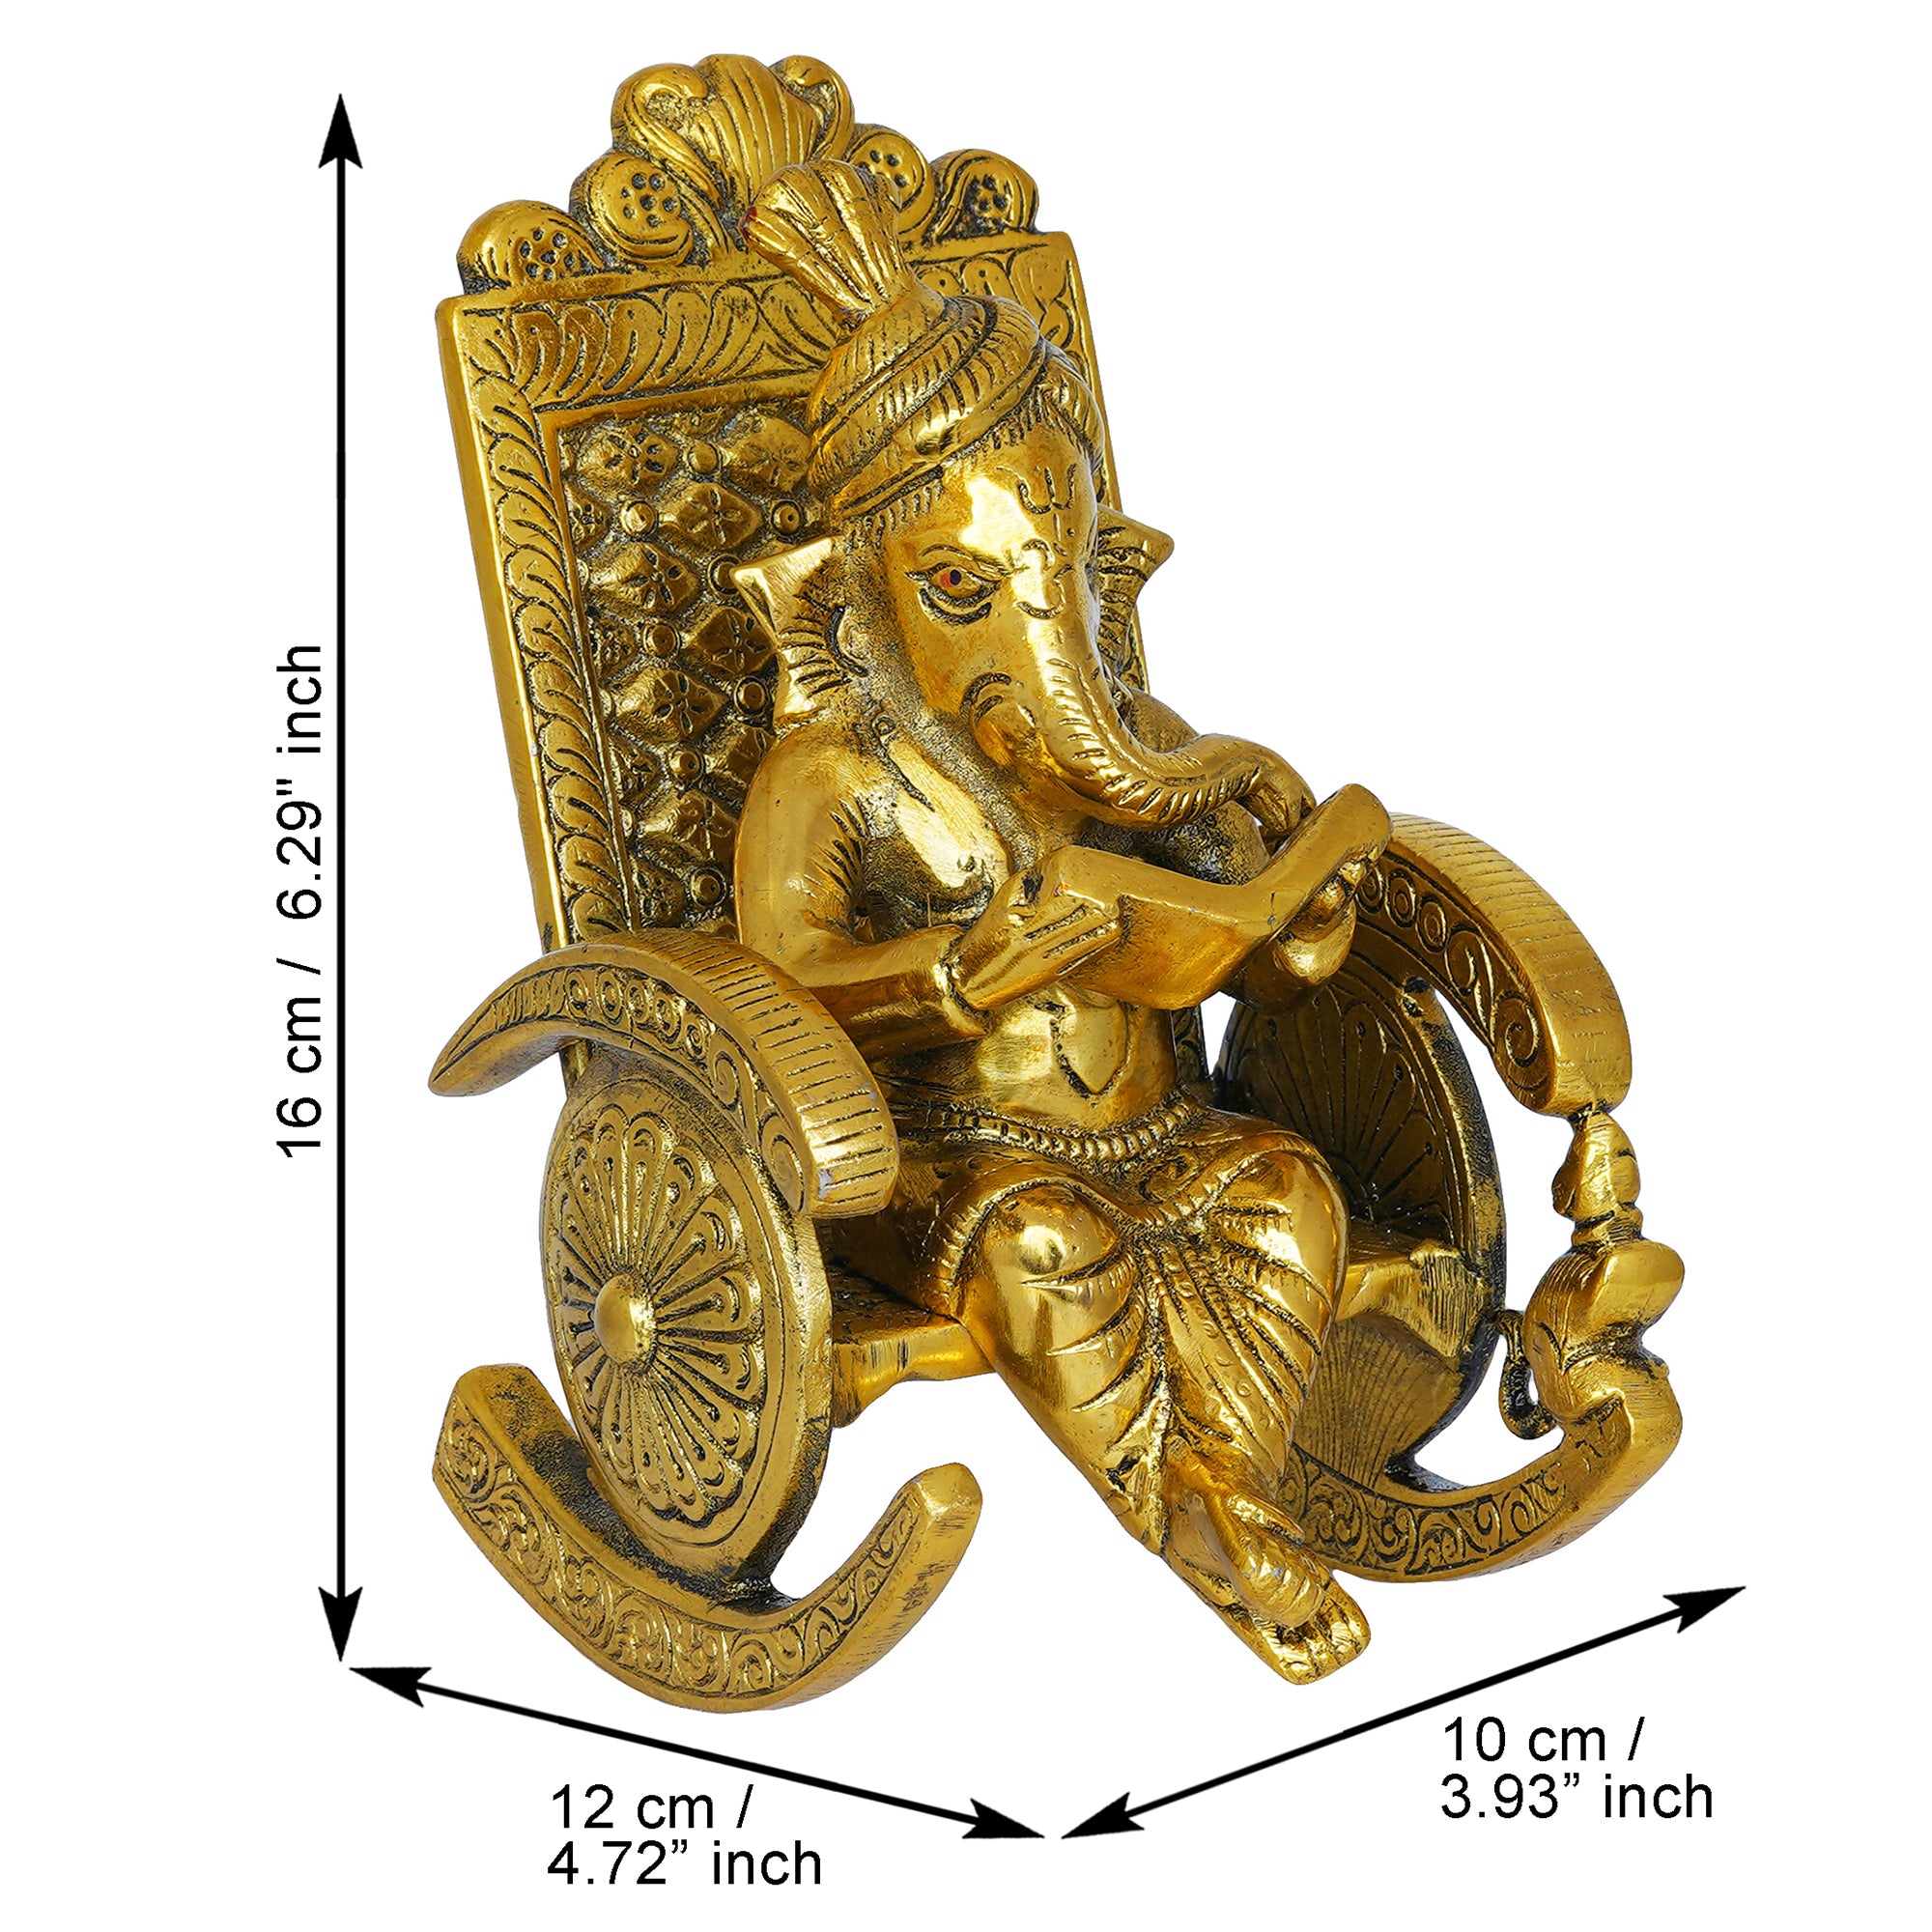 Golden Metal Handcrafted Lord Ganesha Idol Reading Book on Rocking Chair 3